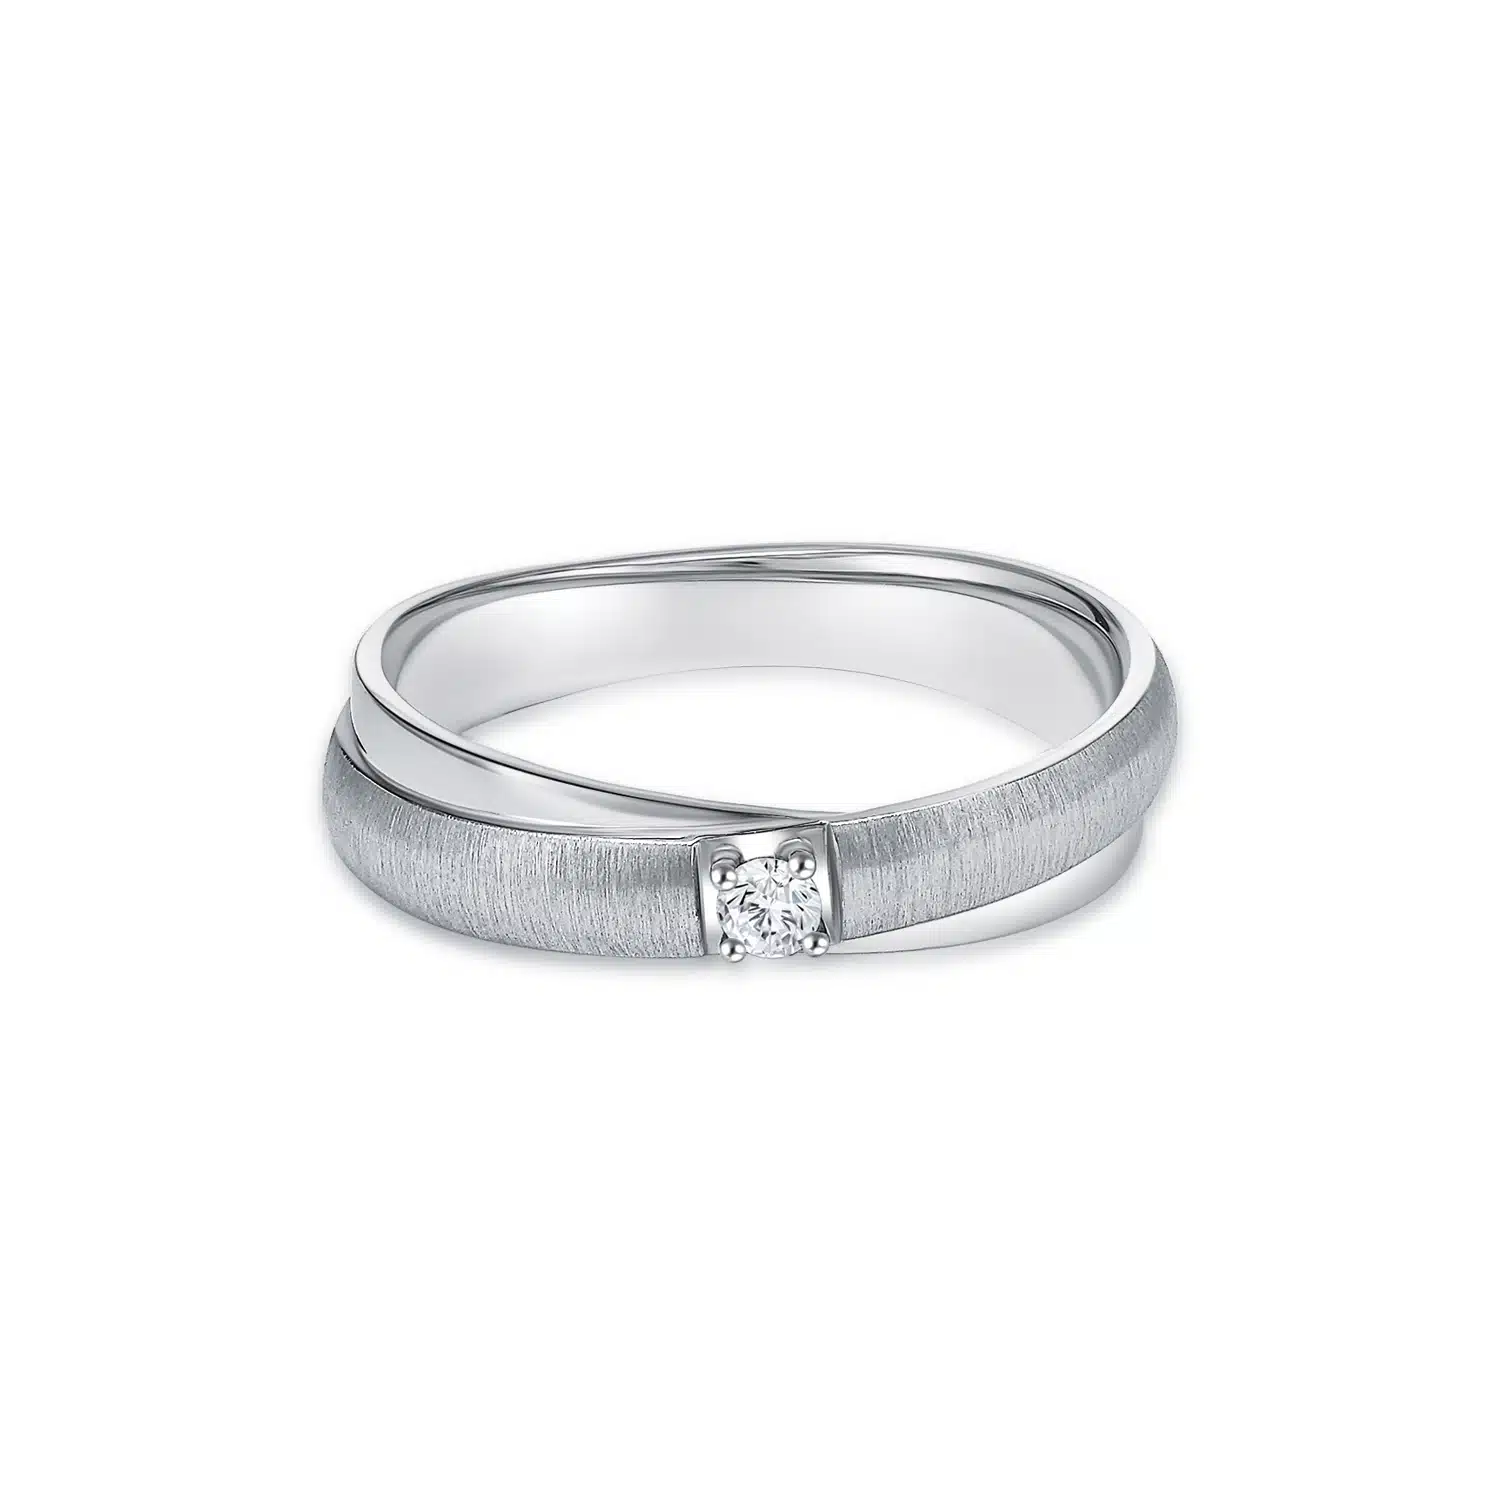 MOMENTO INTERWINED where two individuals' lives interwined WHITE GOLD WEDDING BAND